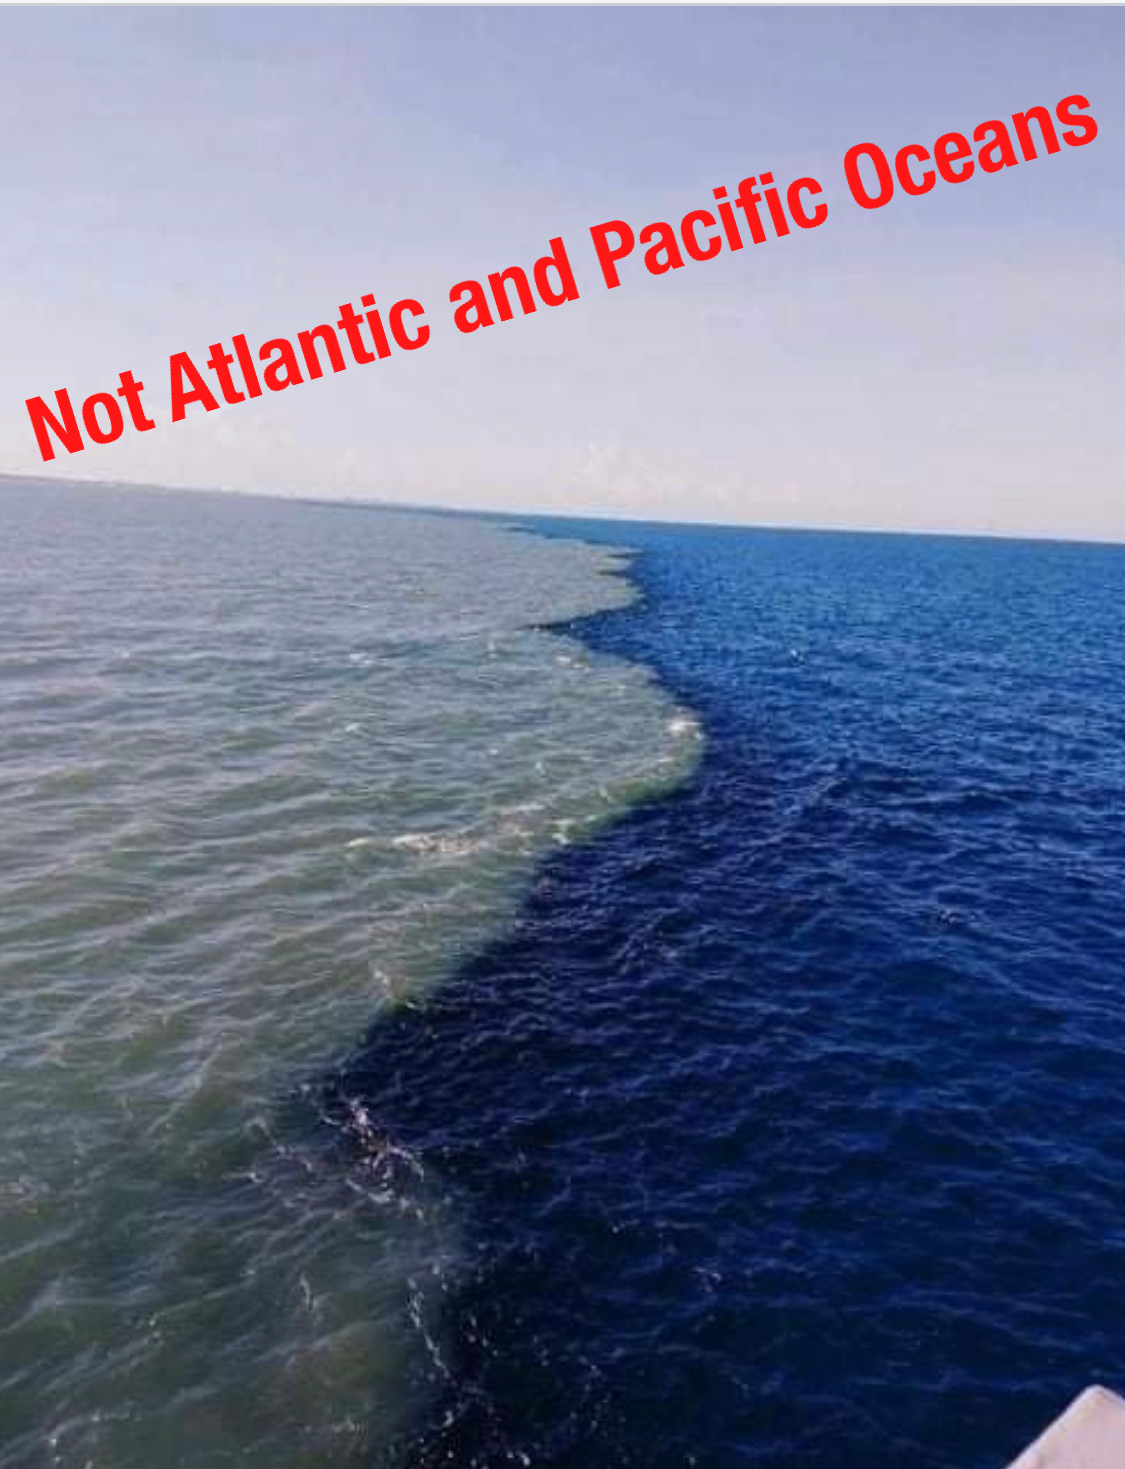 Do the Atlantic and Pacific Oceans Mix?